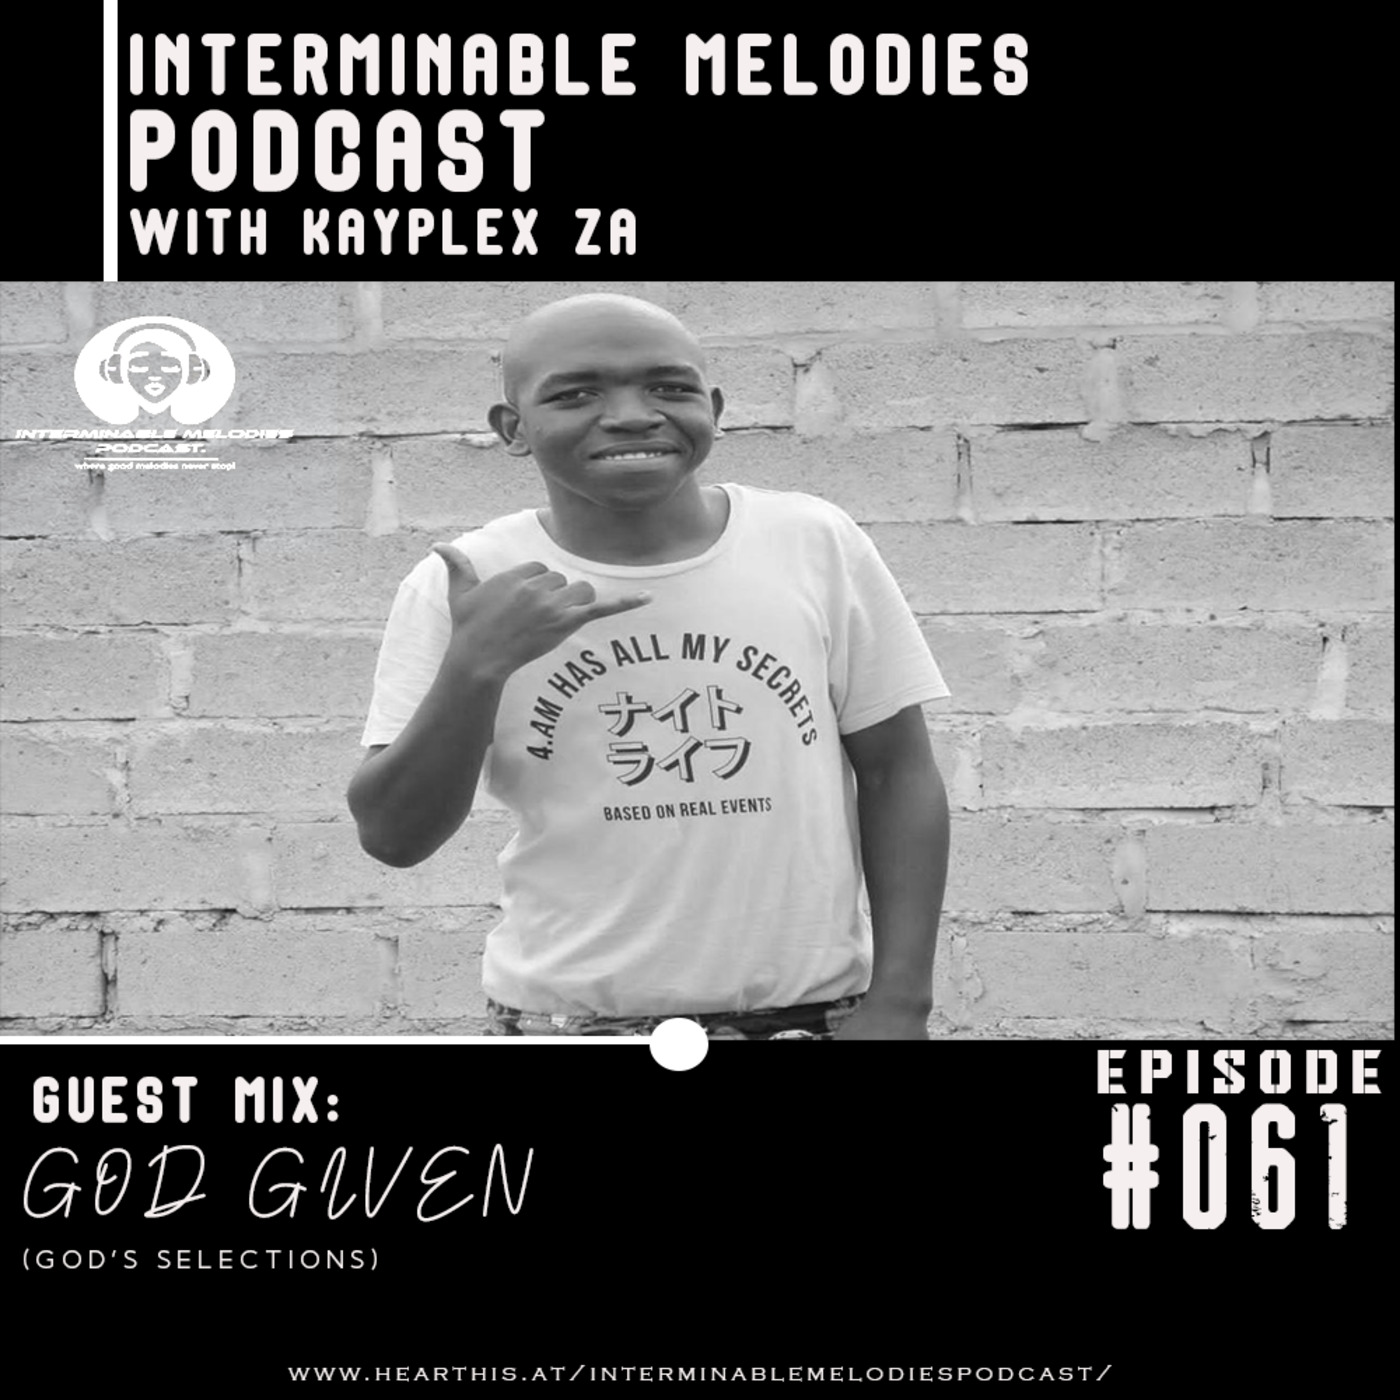 IMP - Episode #061 Guest Mix By God Given (God's Selections)